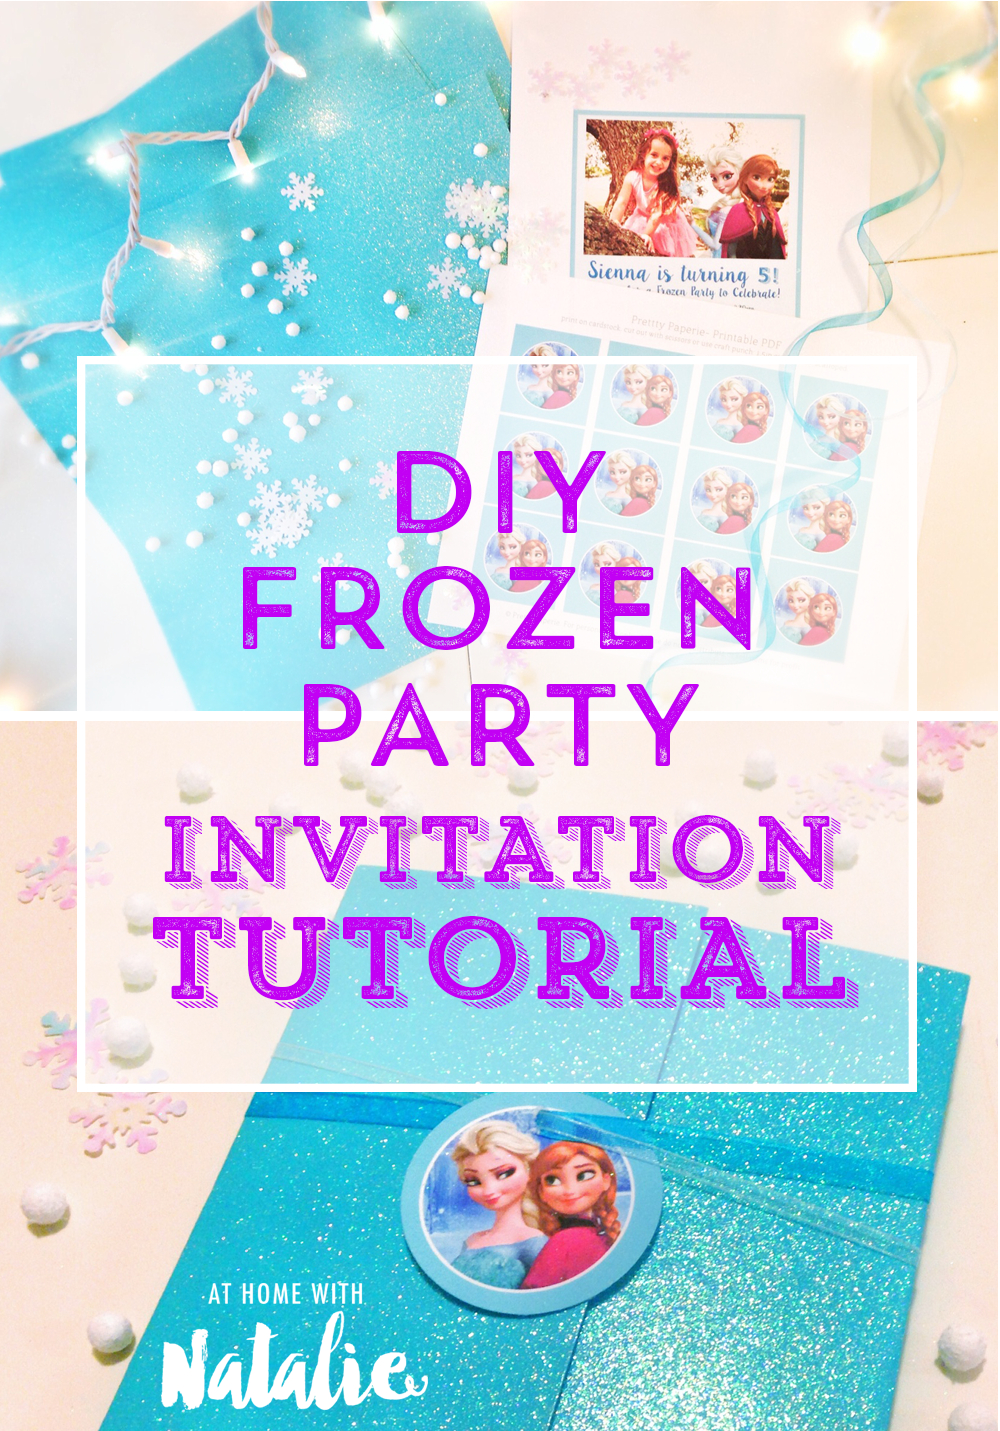 Diy Frozen Party Invitation Tutorial-Free Printable! – At Home With - Free Printable Frozen Birthday Invitations